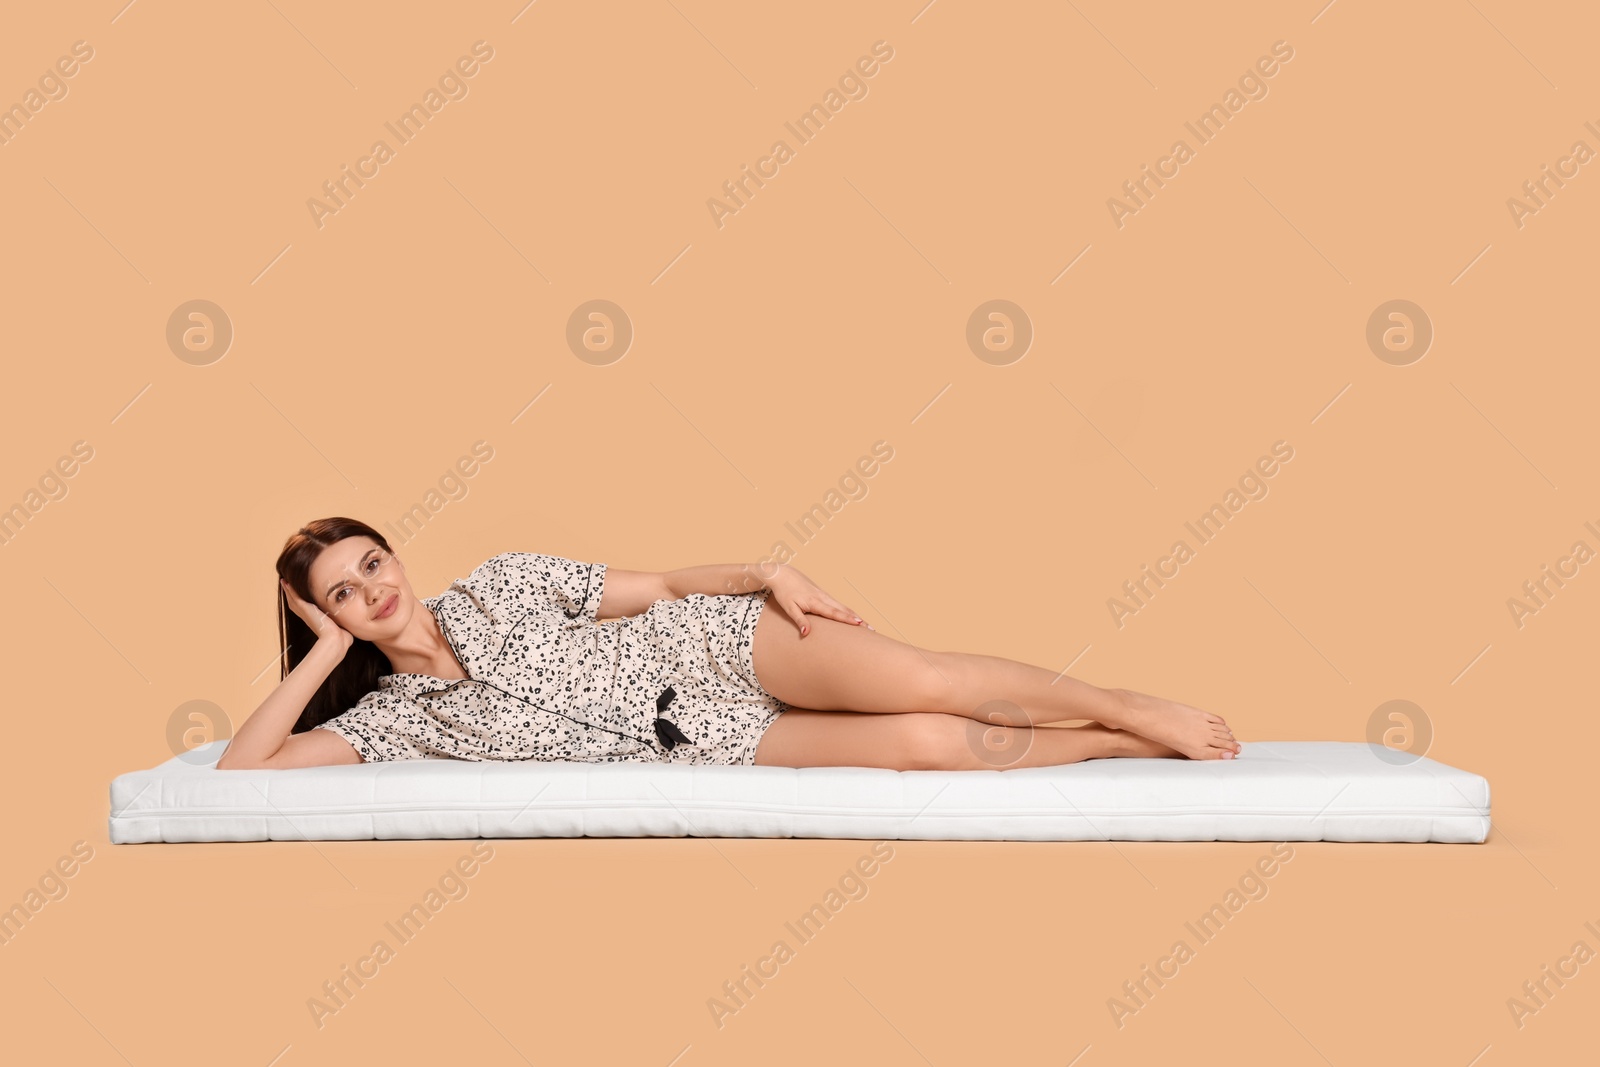 Photo of Young woman lying on soft mattress against beige background